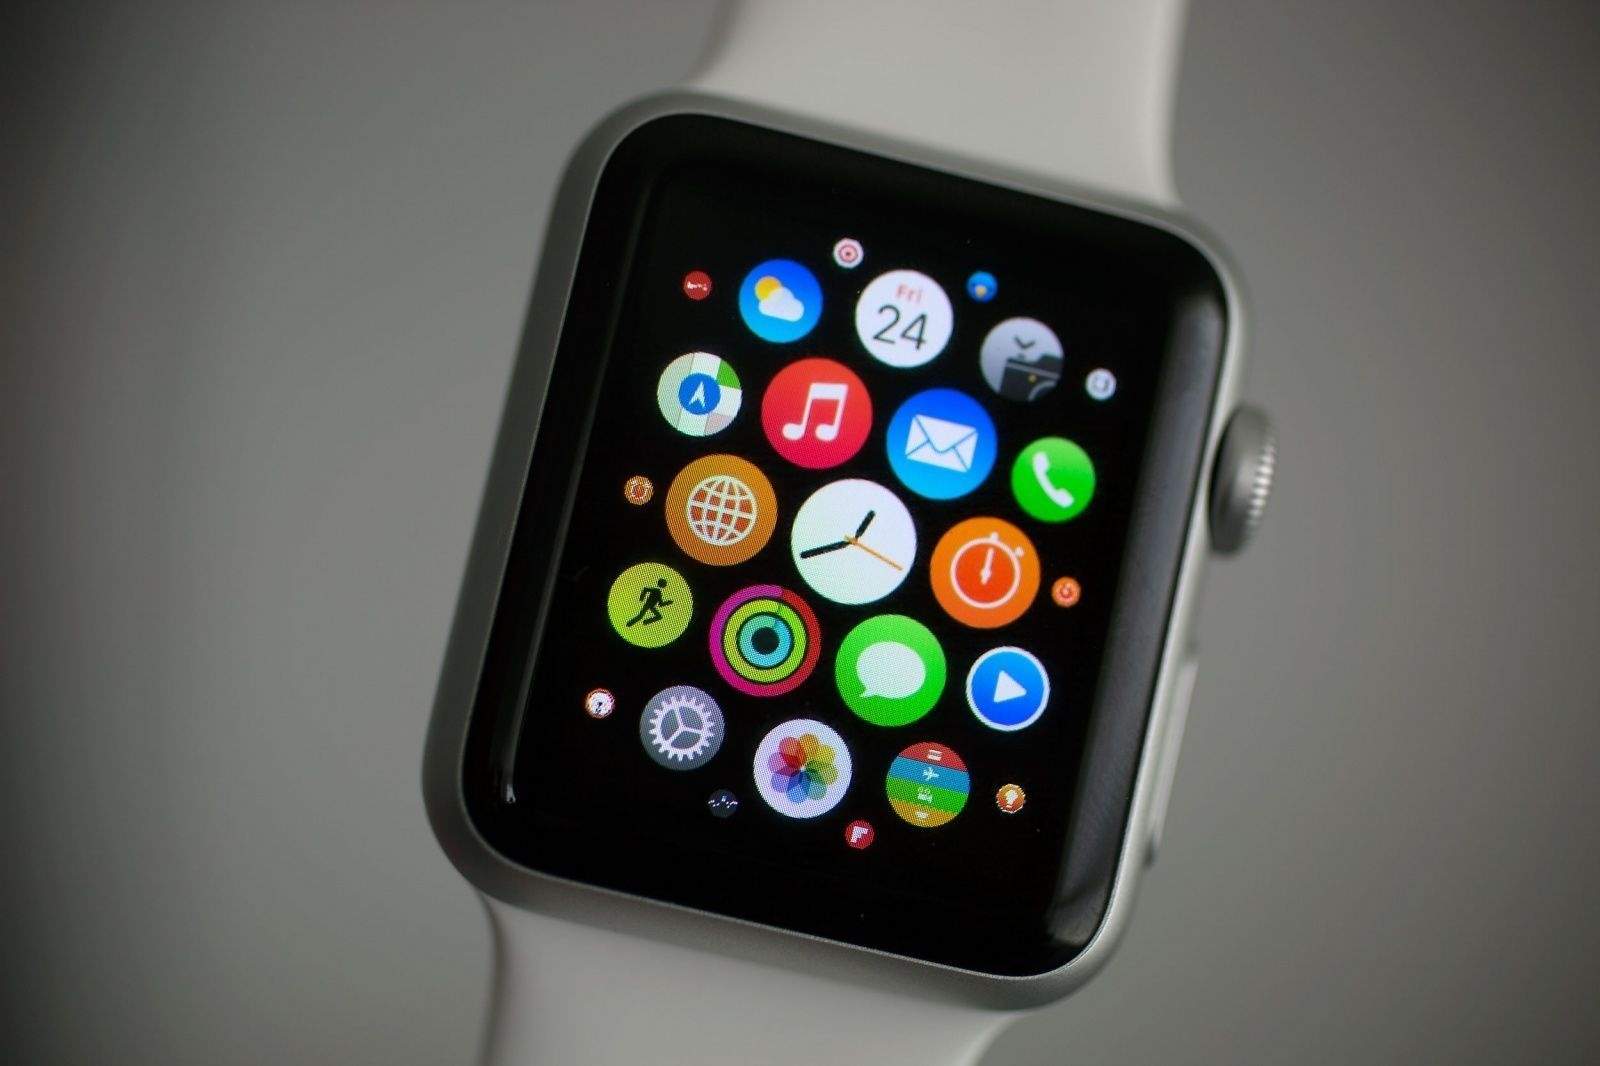 Are Apple Watch expectations just too high?